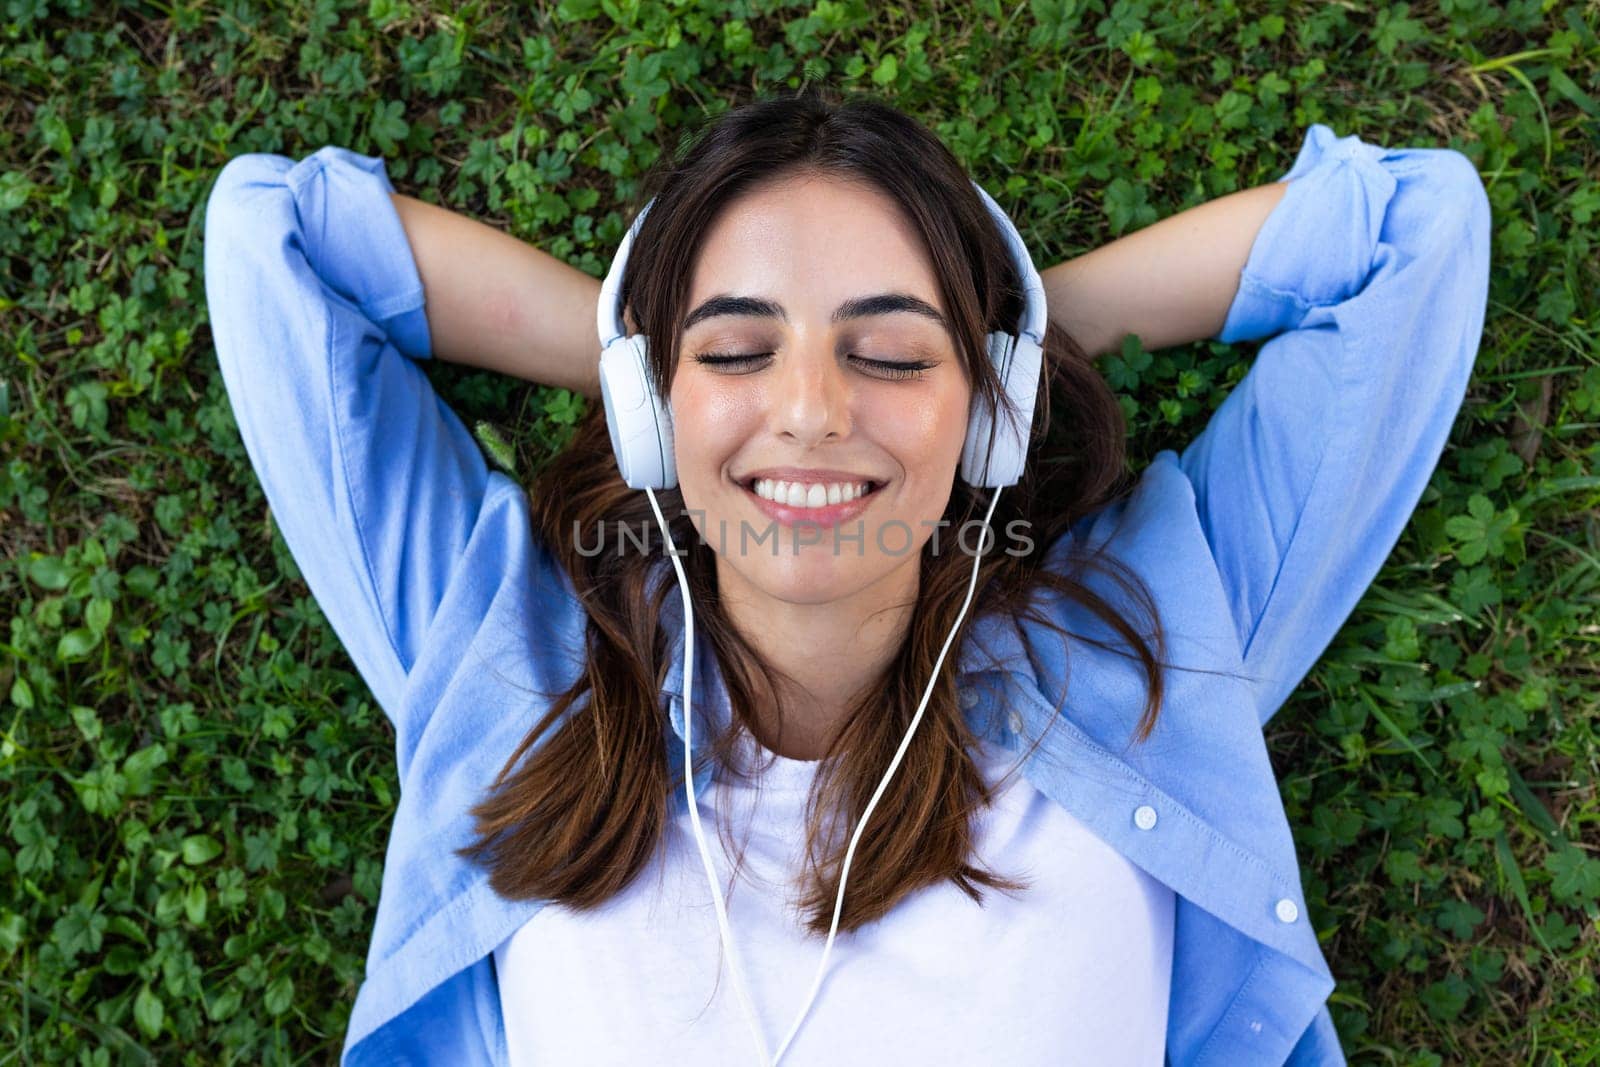 Top view of happy, smiling young caucasian woman relaxing lying down on grass with eyes closed listening to music with headphones. Wellbeing and lifestyle concept.